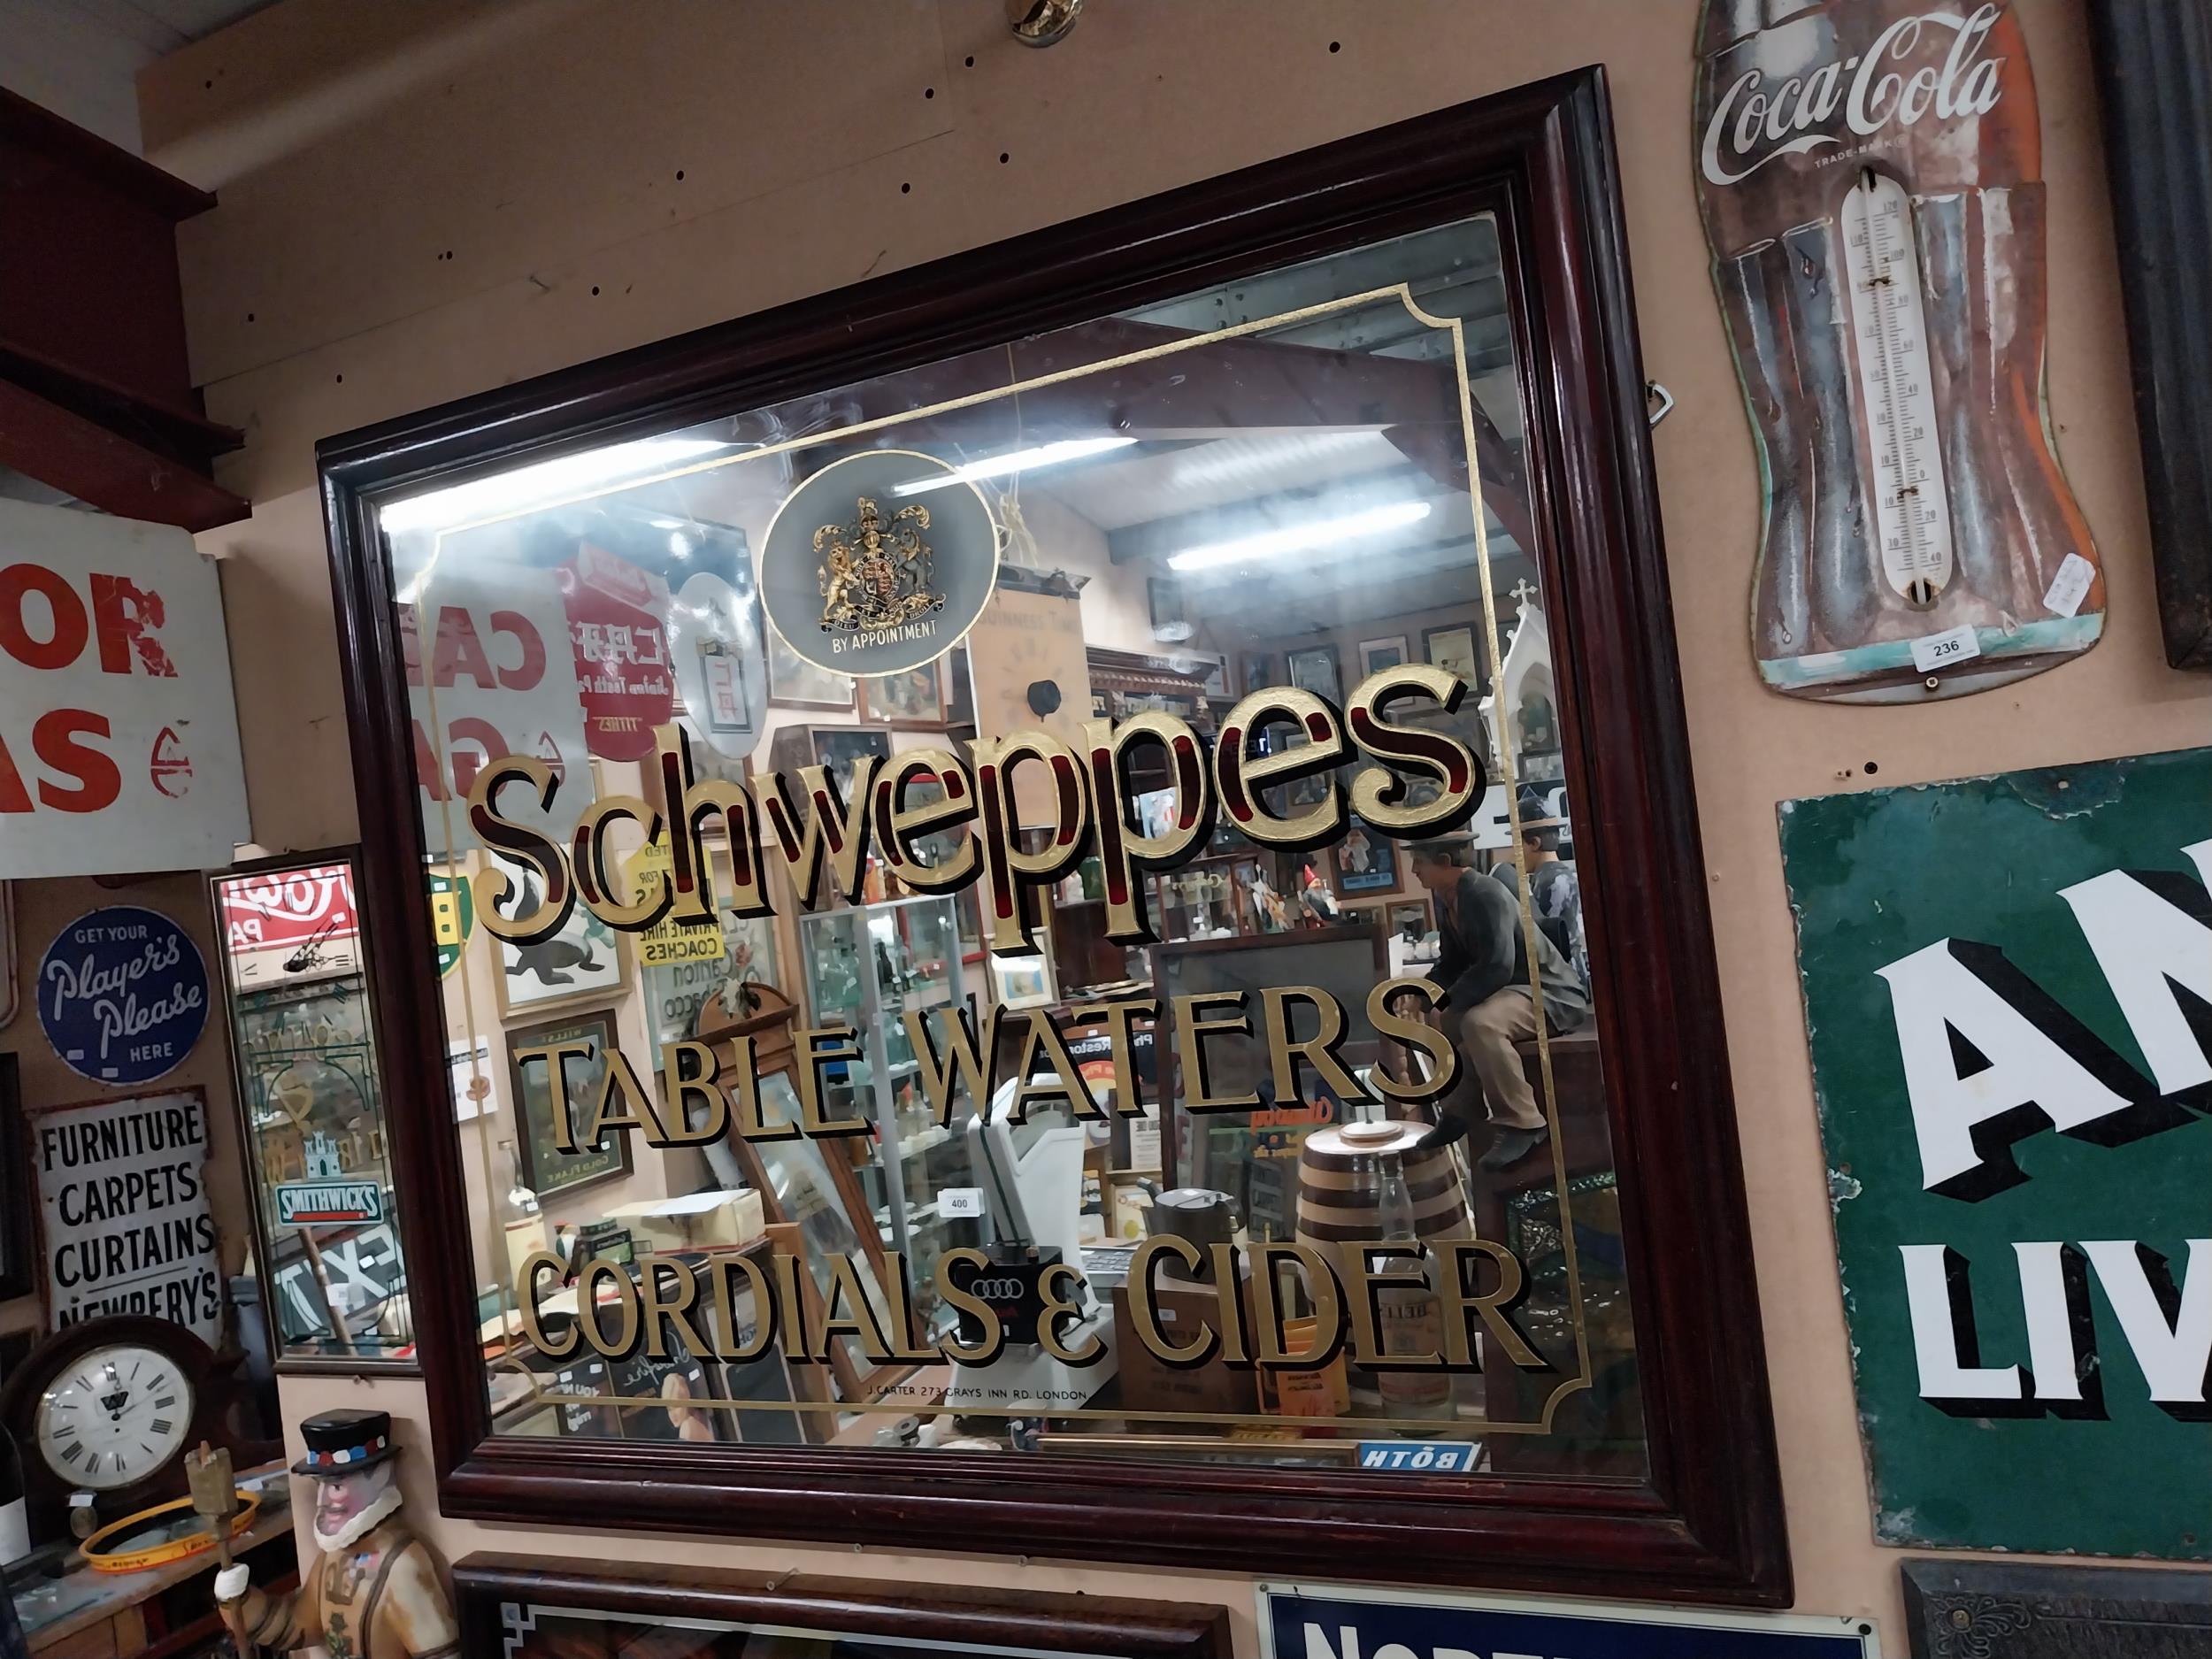 Schweppes Table Waters Cordials and Cider framed advertising mirror by J Carter 273 Grays Inn Road - Image 9 of 10